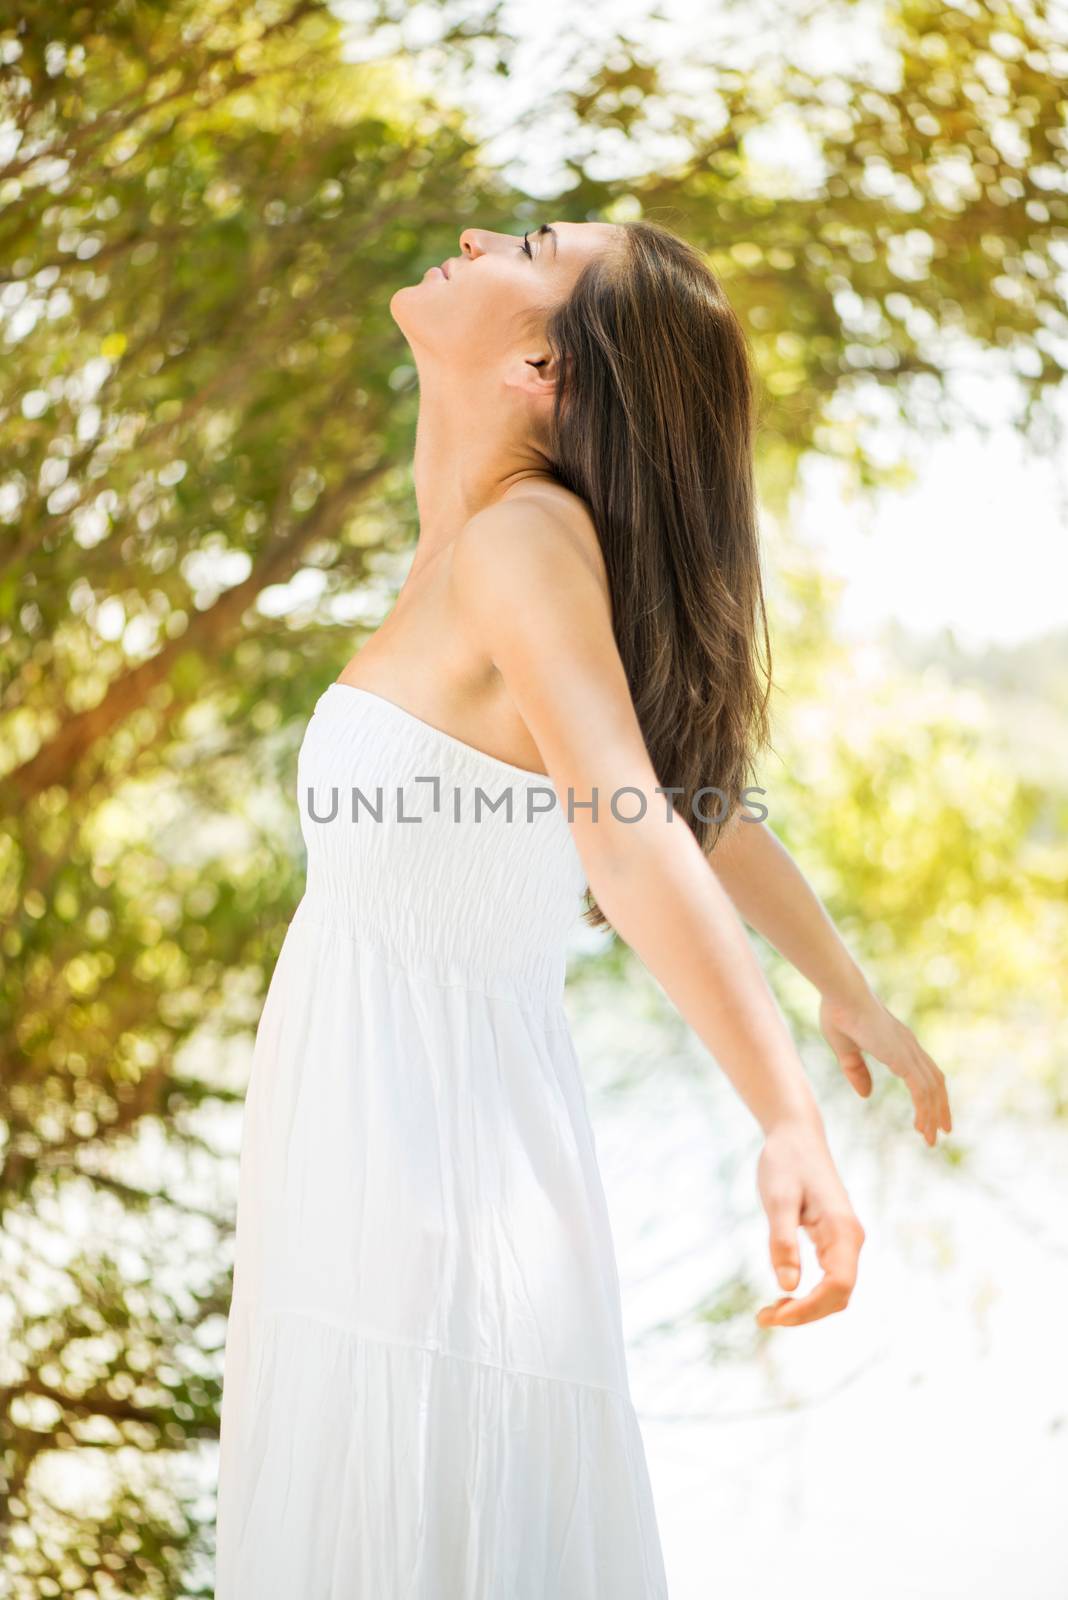 Young beautiful woman with arms outstretched enjoying in the nature.